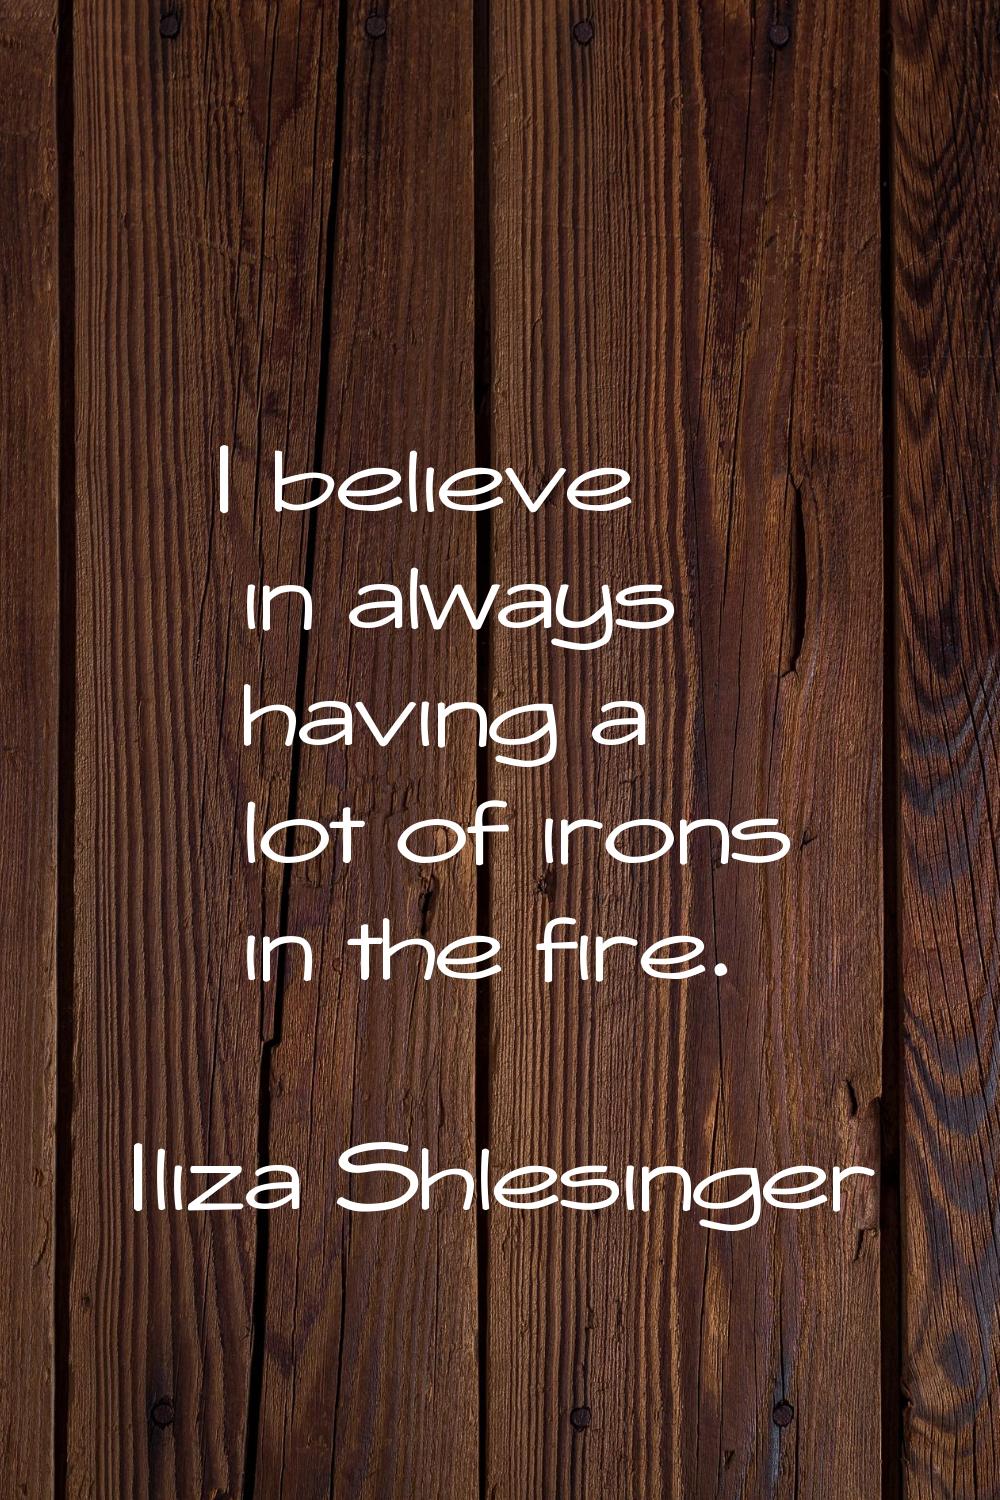 I believe in always having a lot of irons in the fire.